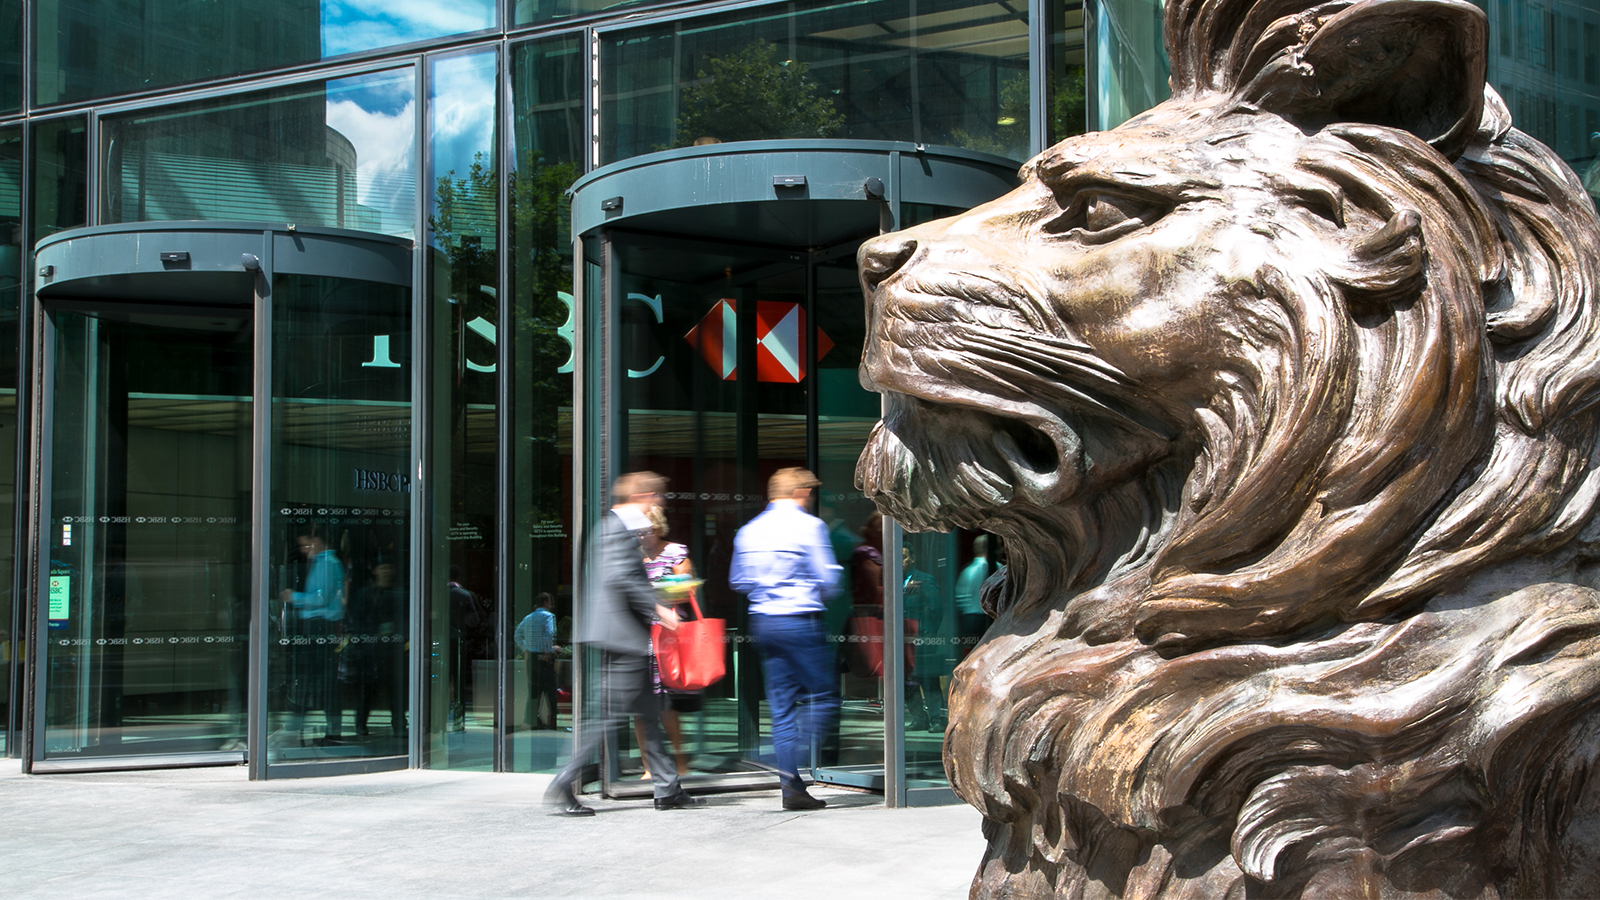 One of HSBC’s famous lions outside the bank’s London headquarters